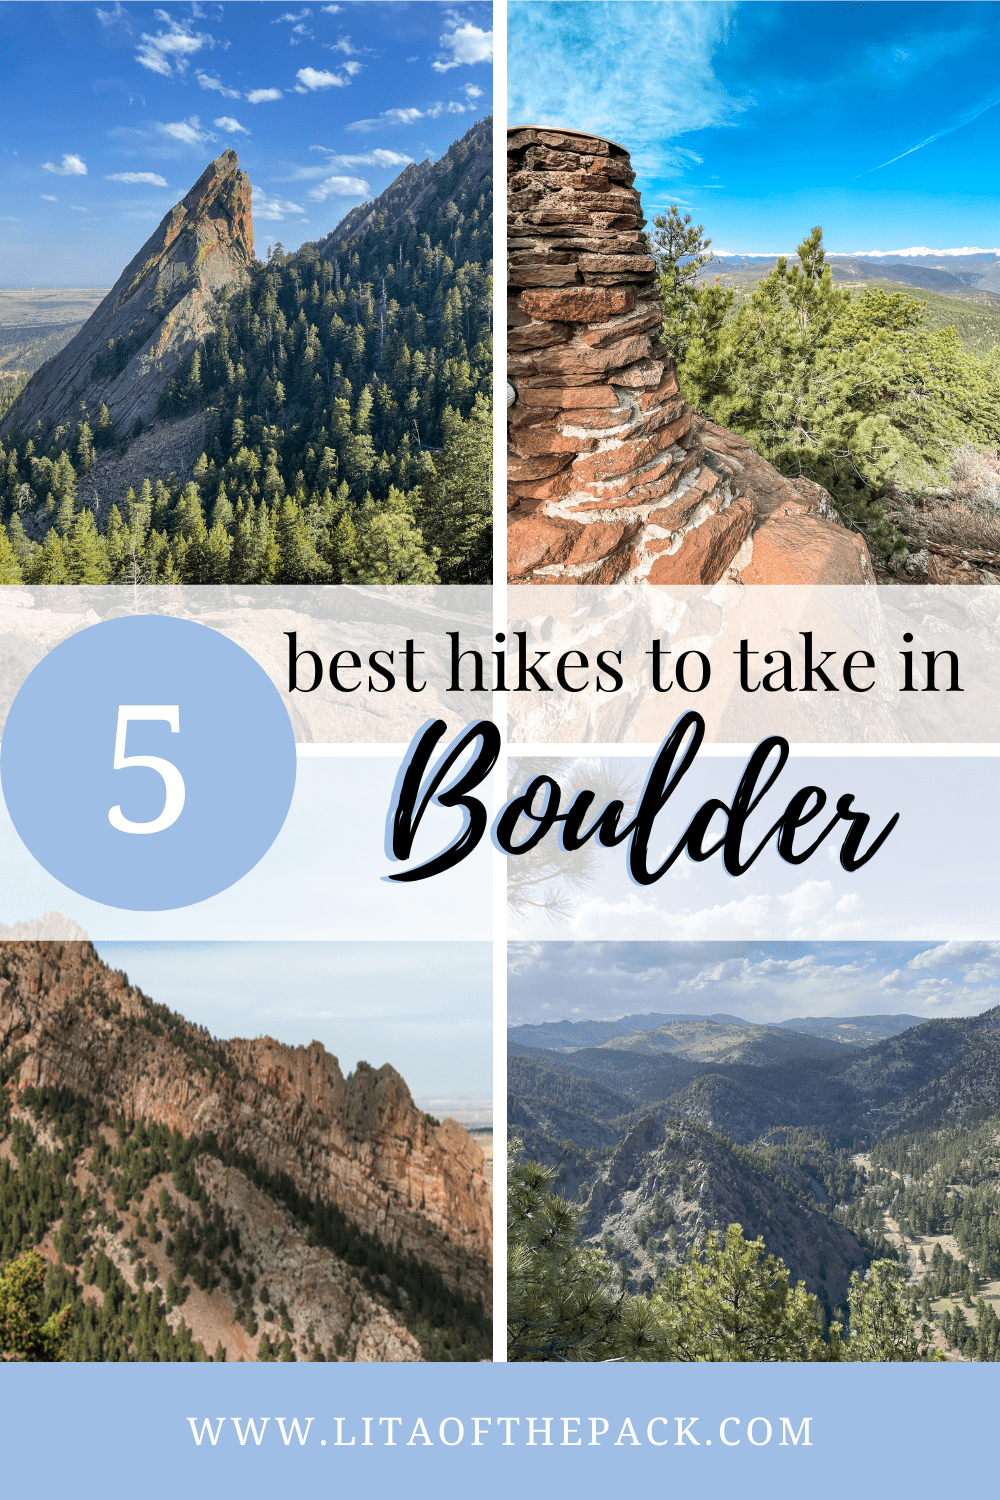 four pictures of hikes in boulder